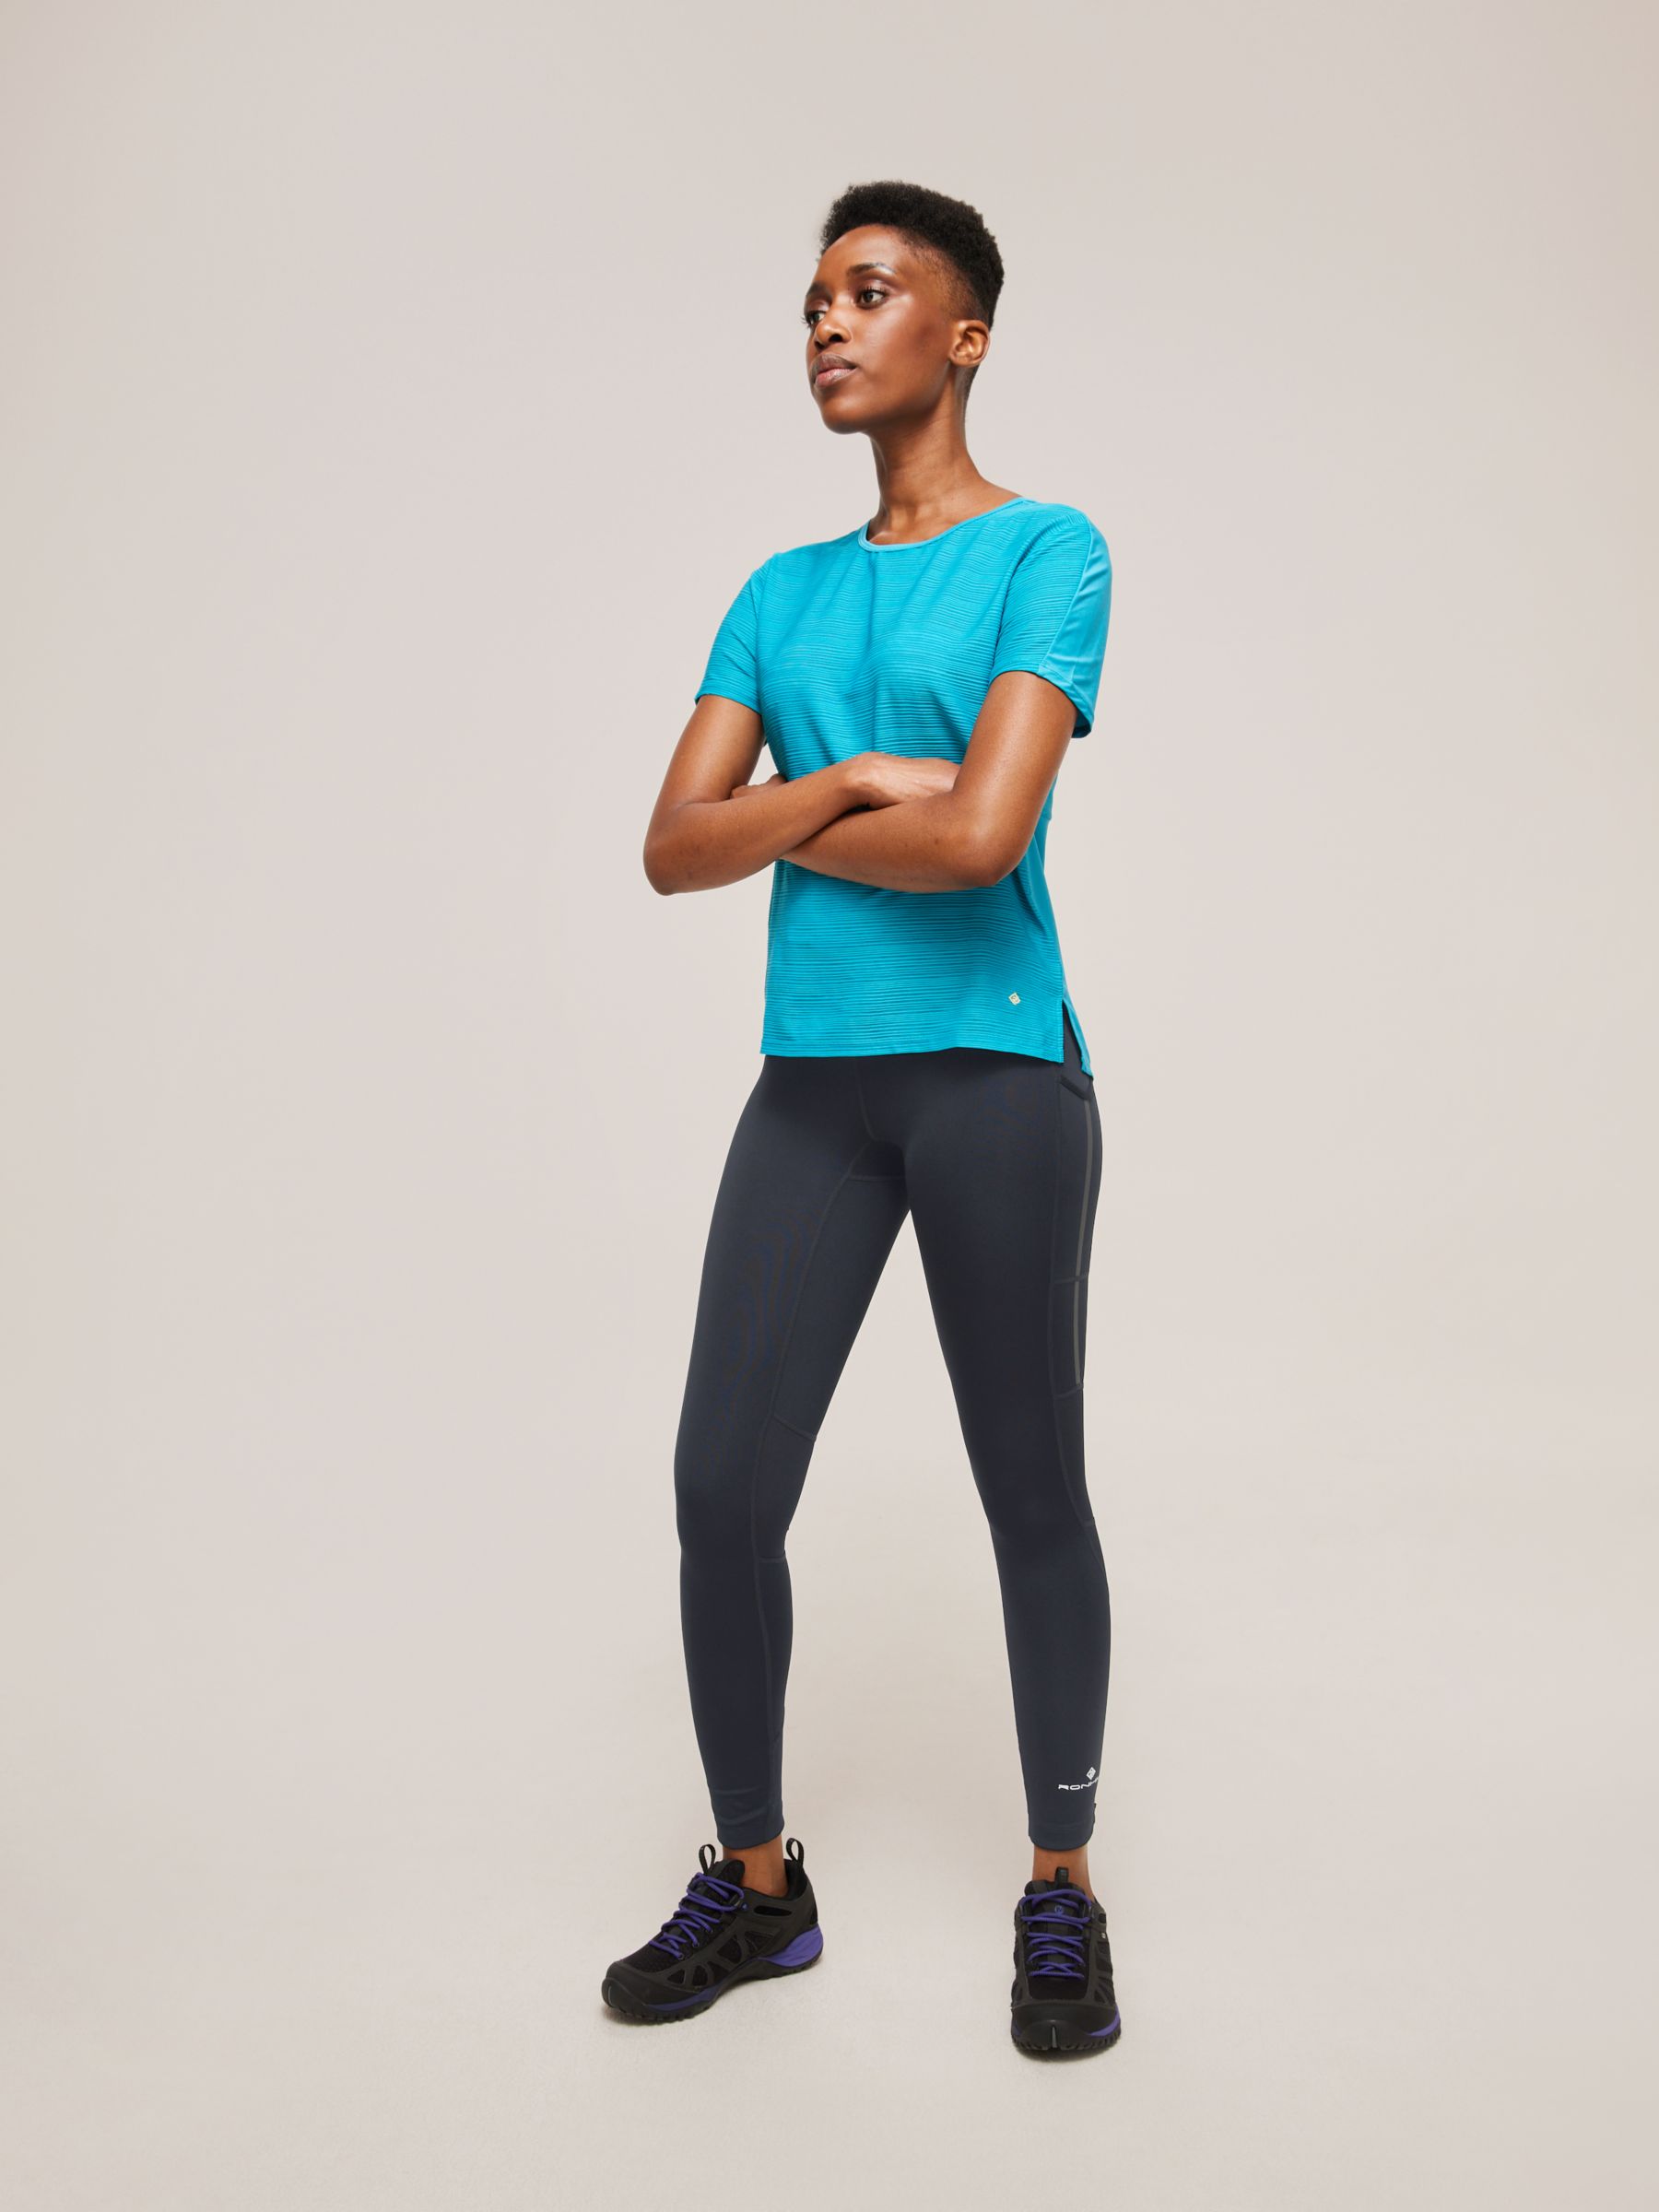 Ronhill Tech Revive Stretch Running Leggings at John Lewis & Partners